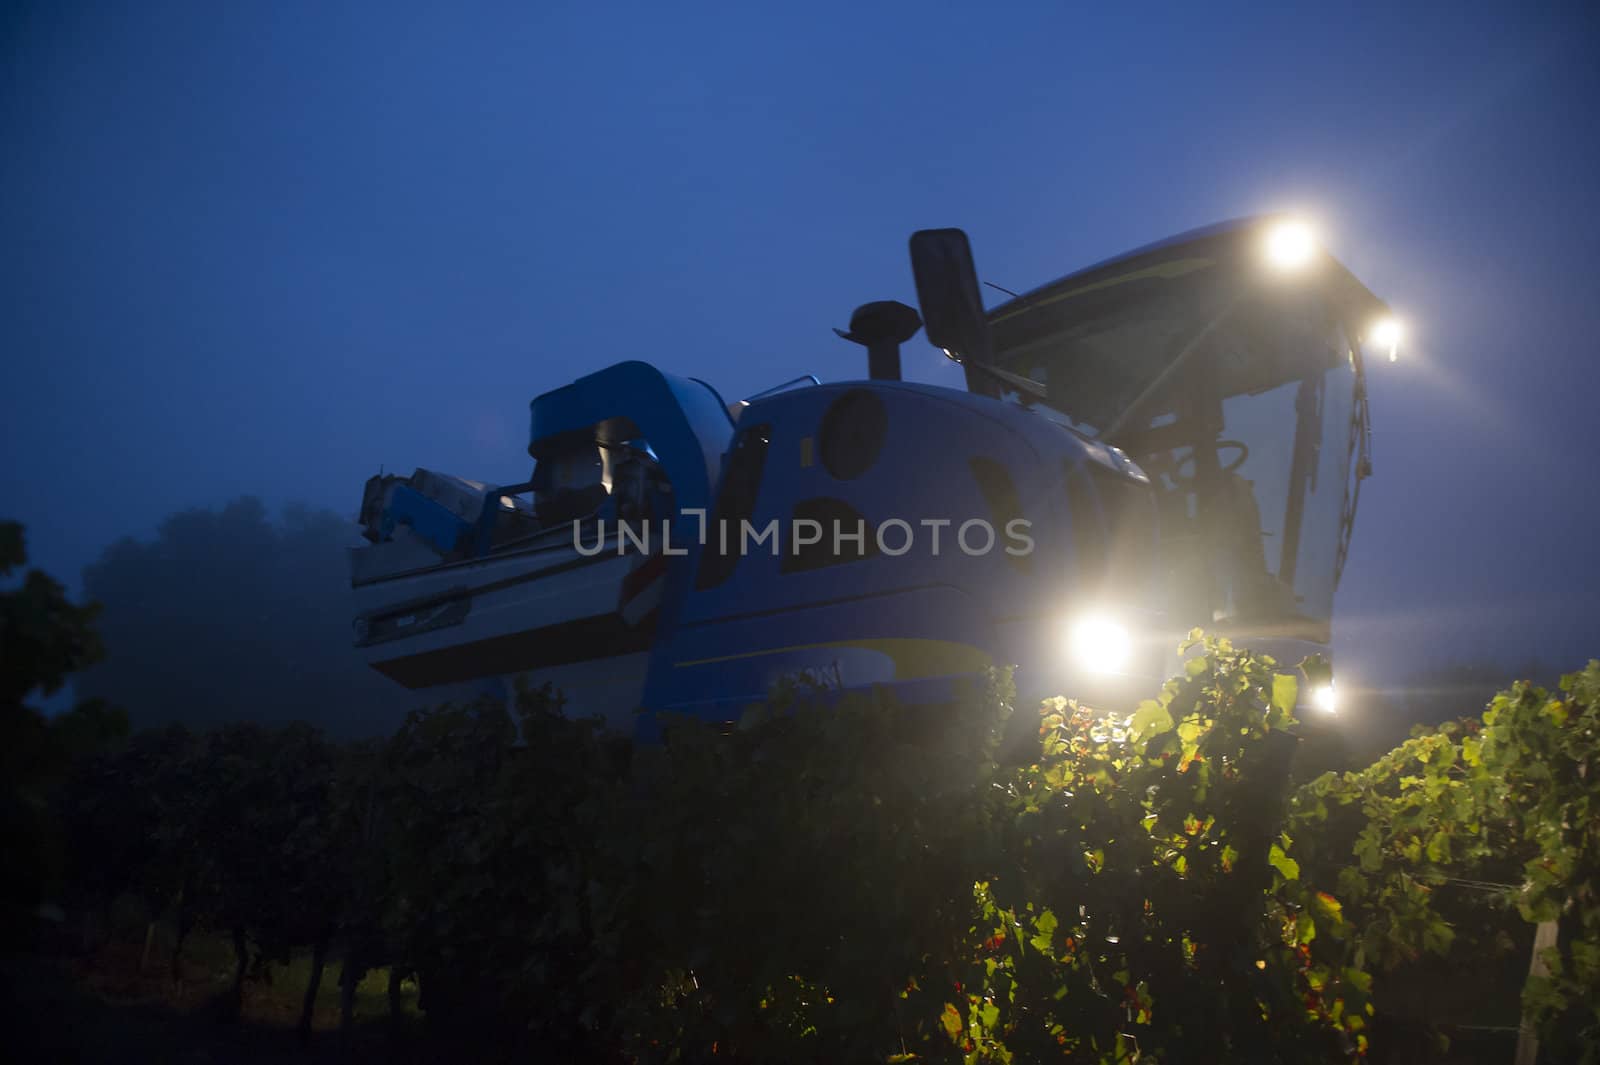 Mechanical harvesting of grapes in the vineyard by FreeProd